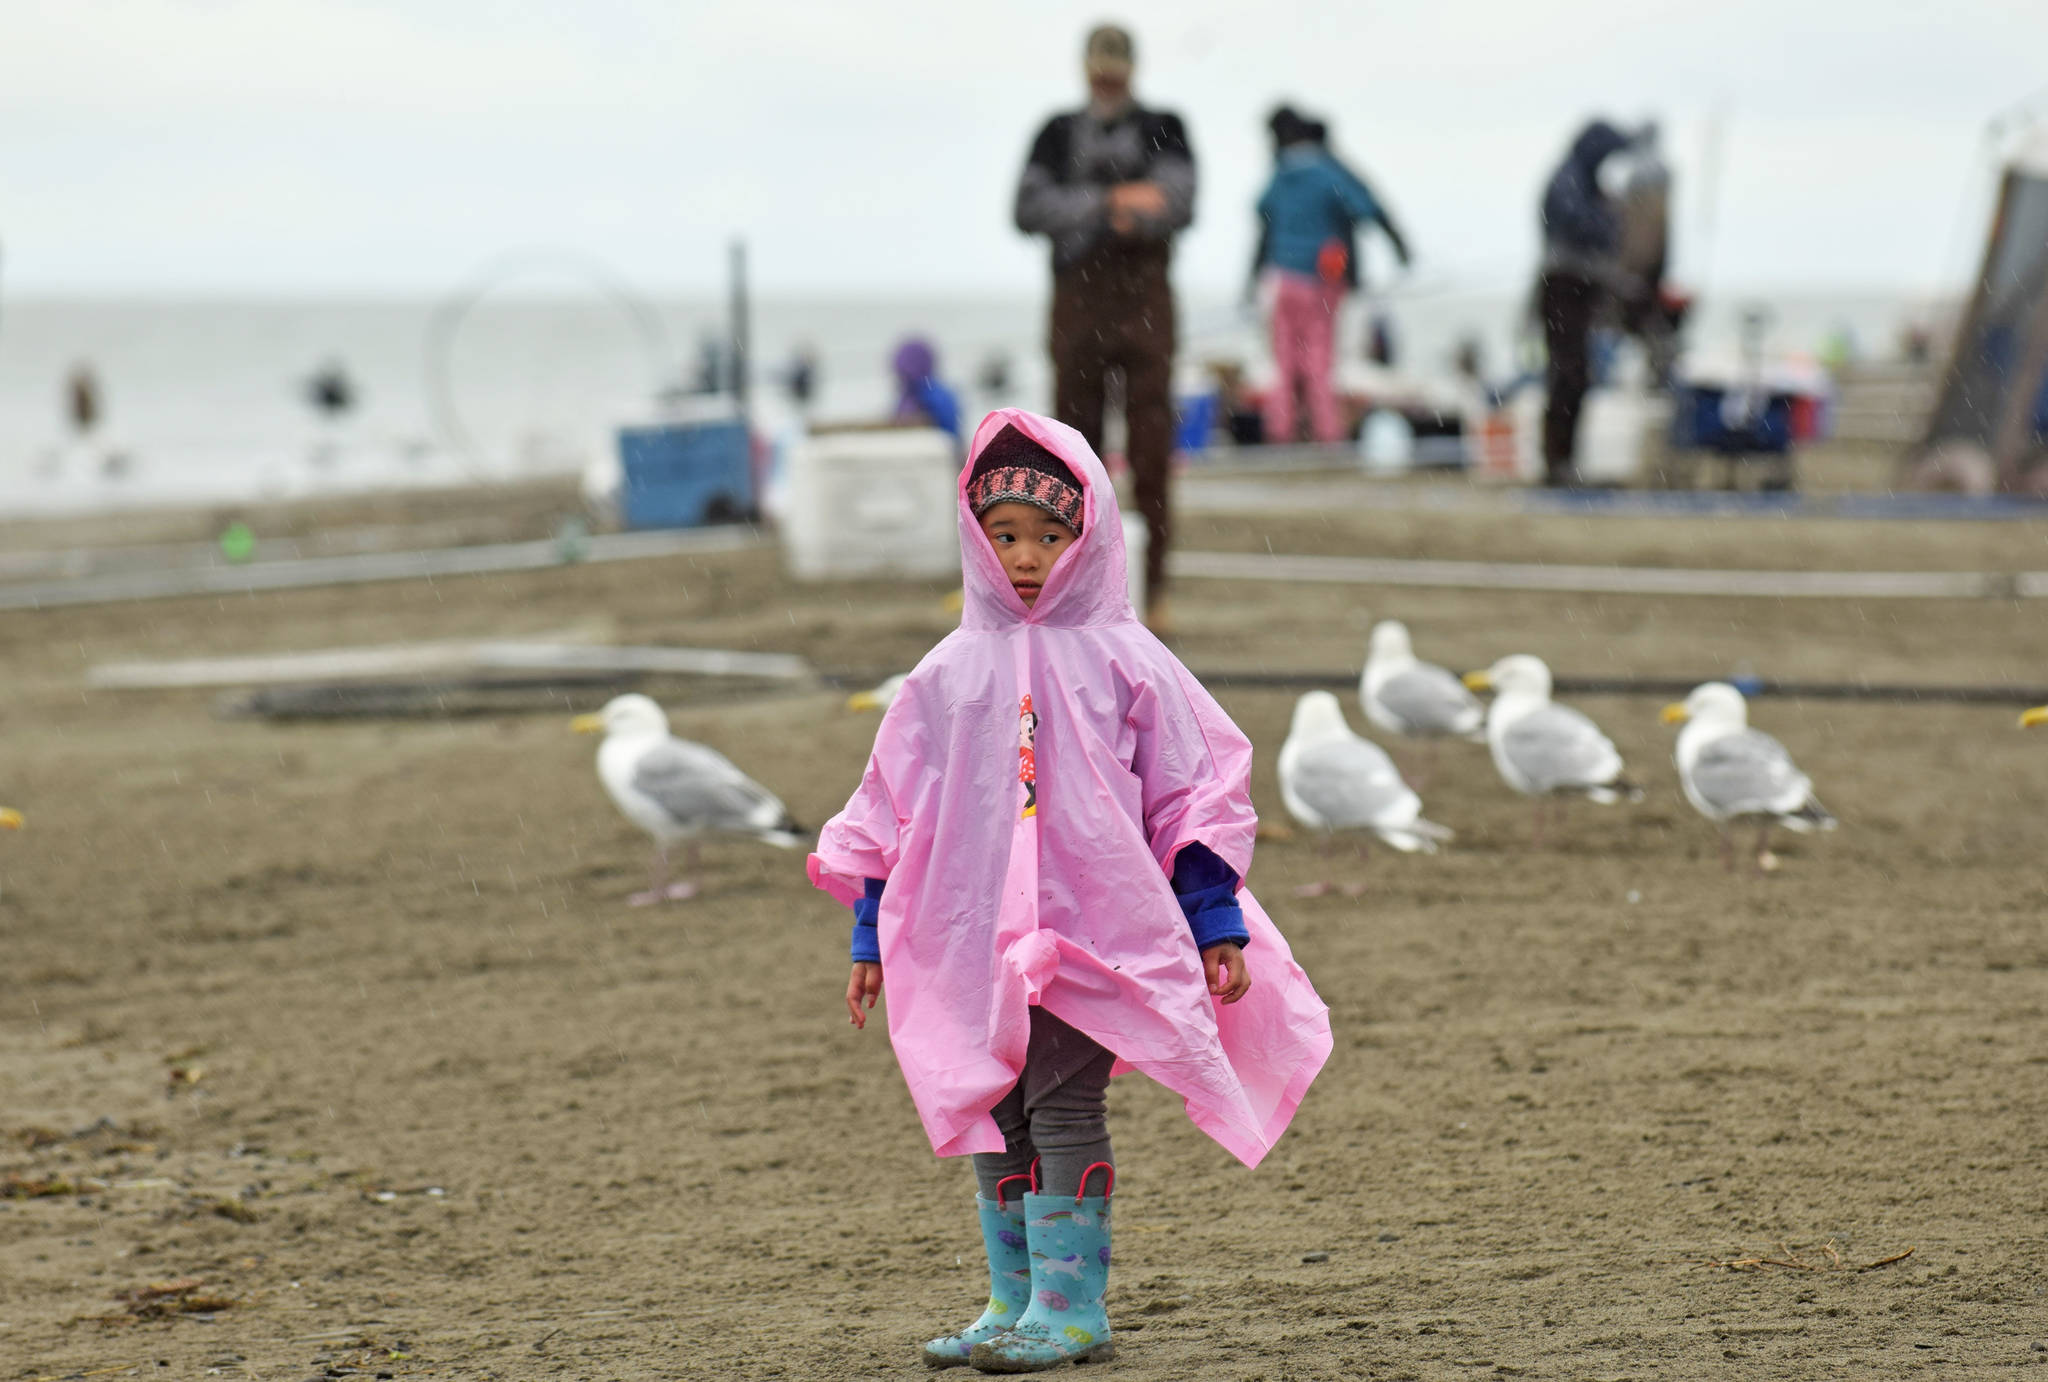 A young girl takes shelter from the rain on Tuesday, July 10, 2018, during the first day of dipnetting season in Kenai, Alaska. (Photo by Erin Thompson/Peninsula Clarion)